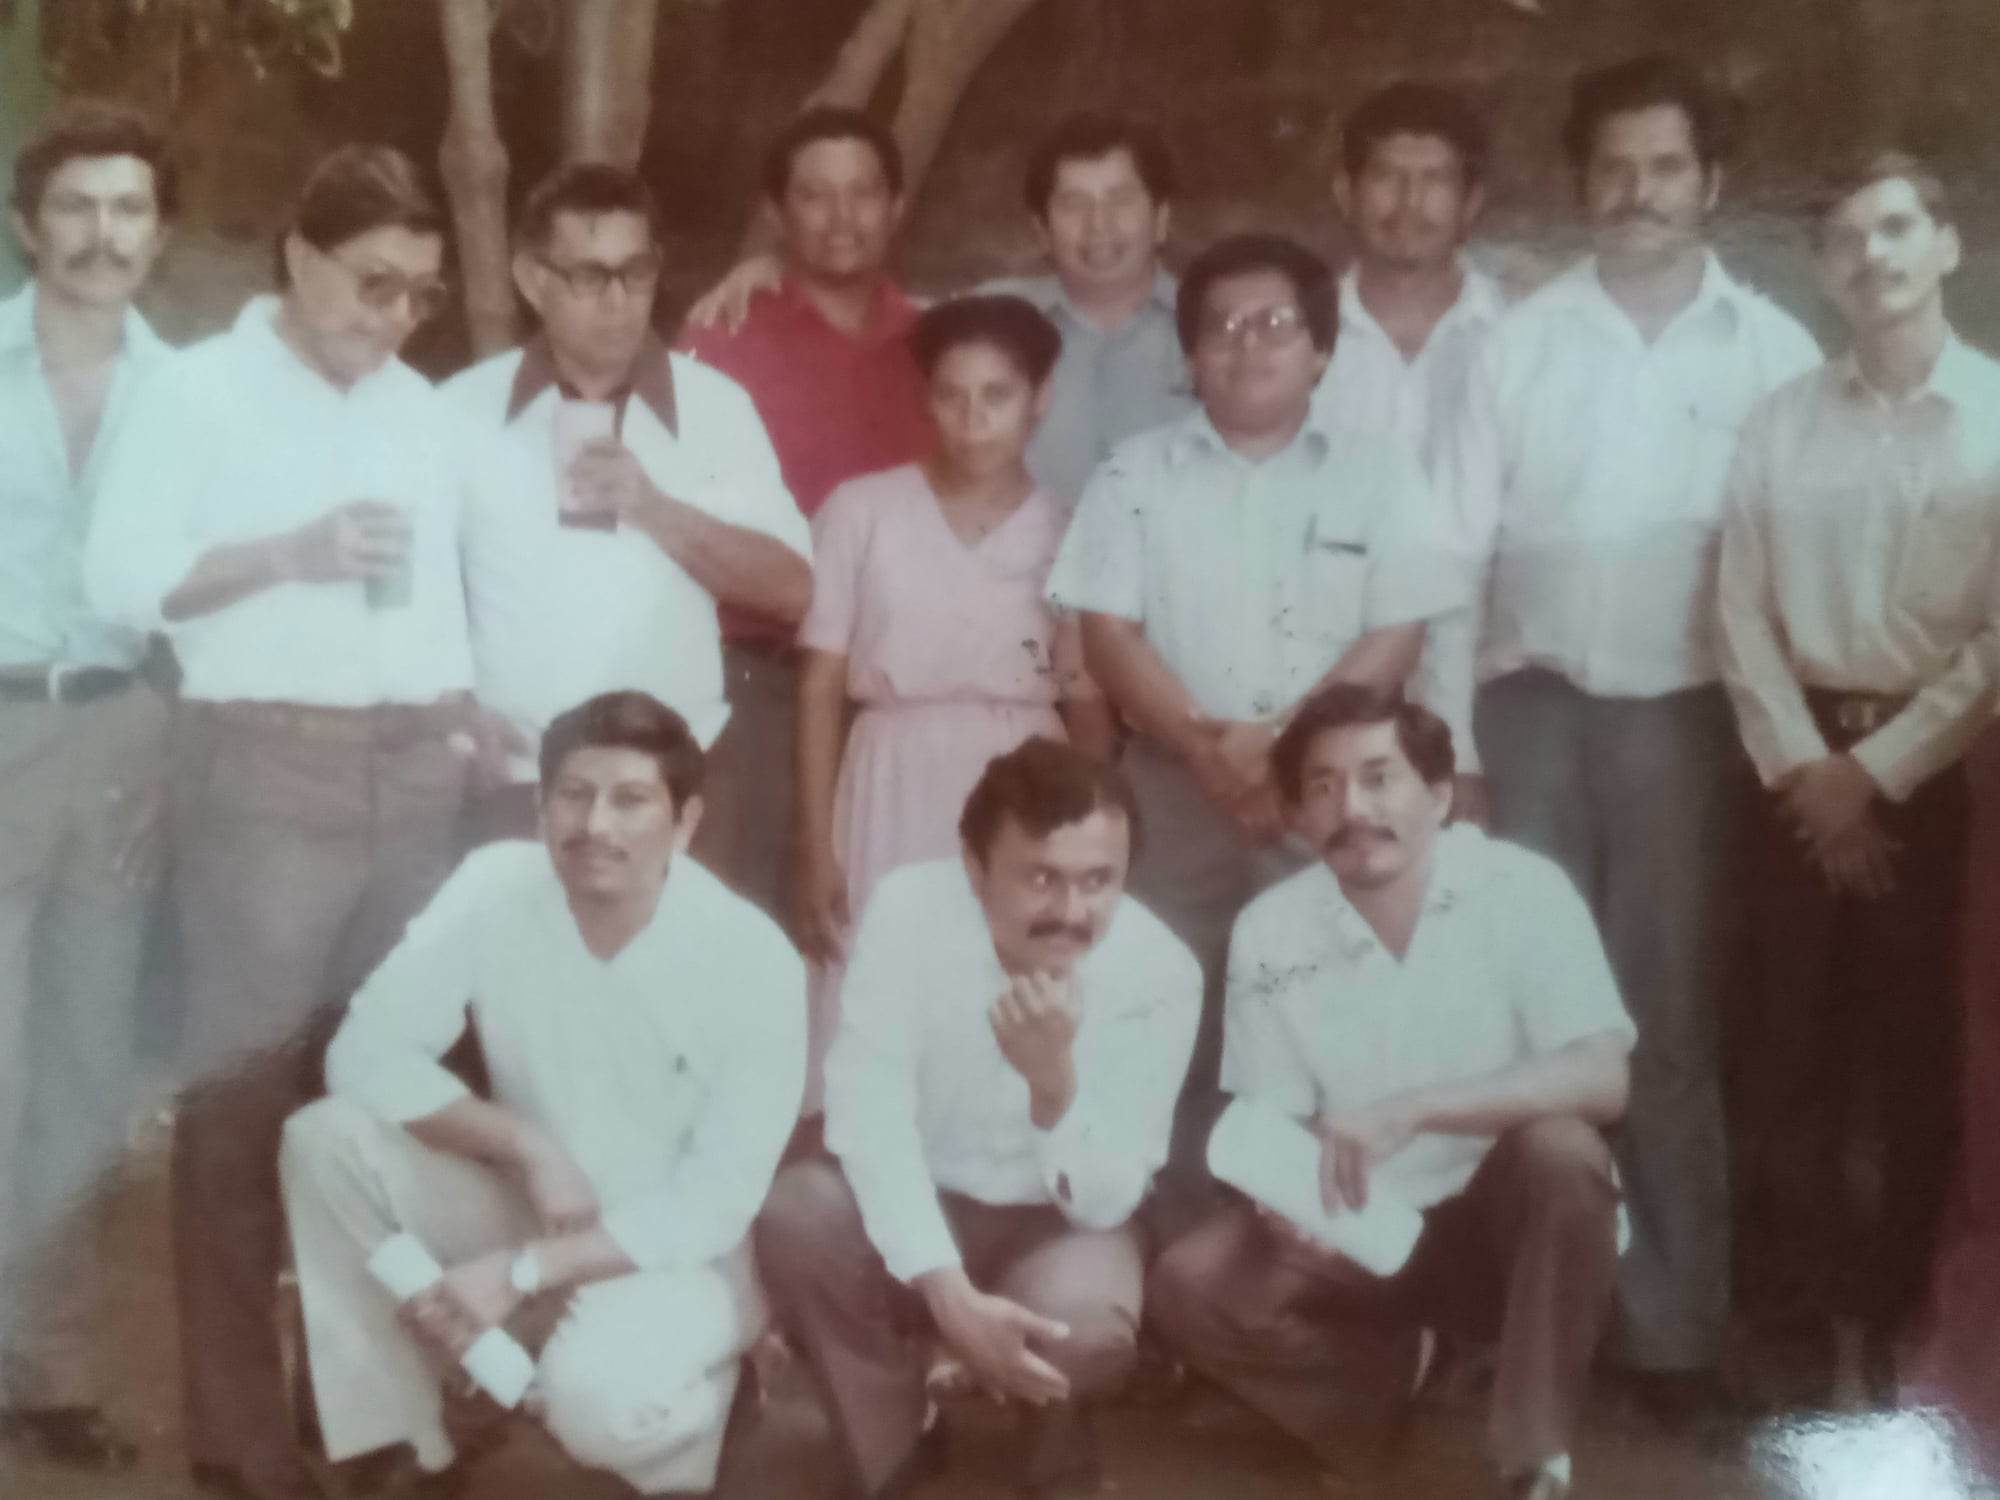 Pastors graduating from a pastoral and community development training in the 1990s